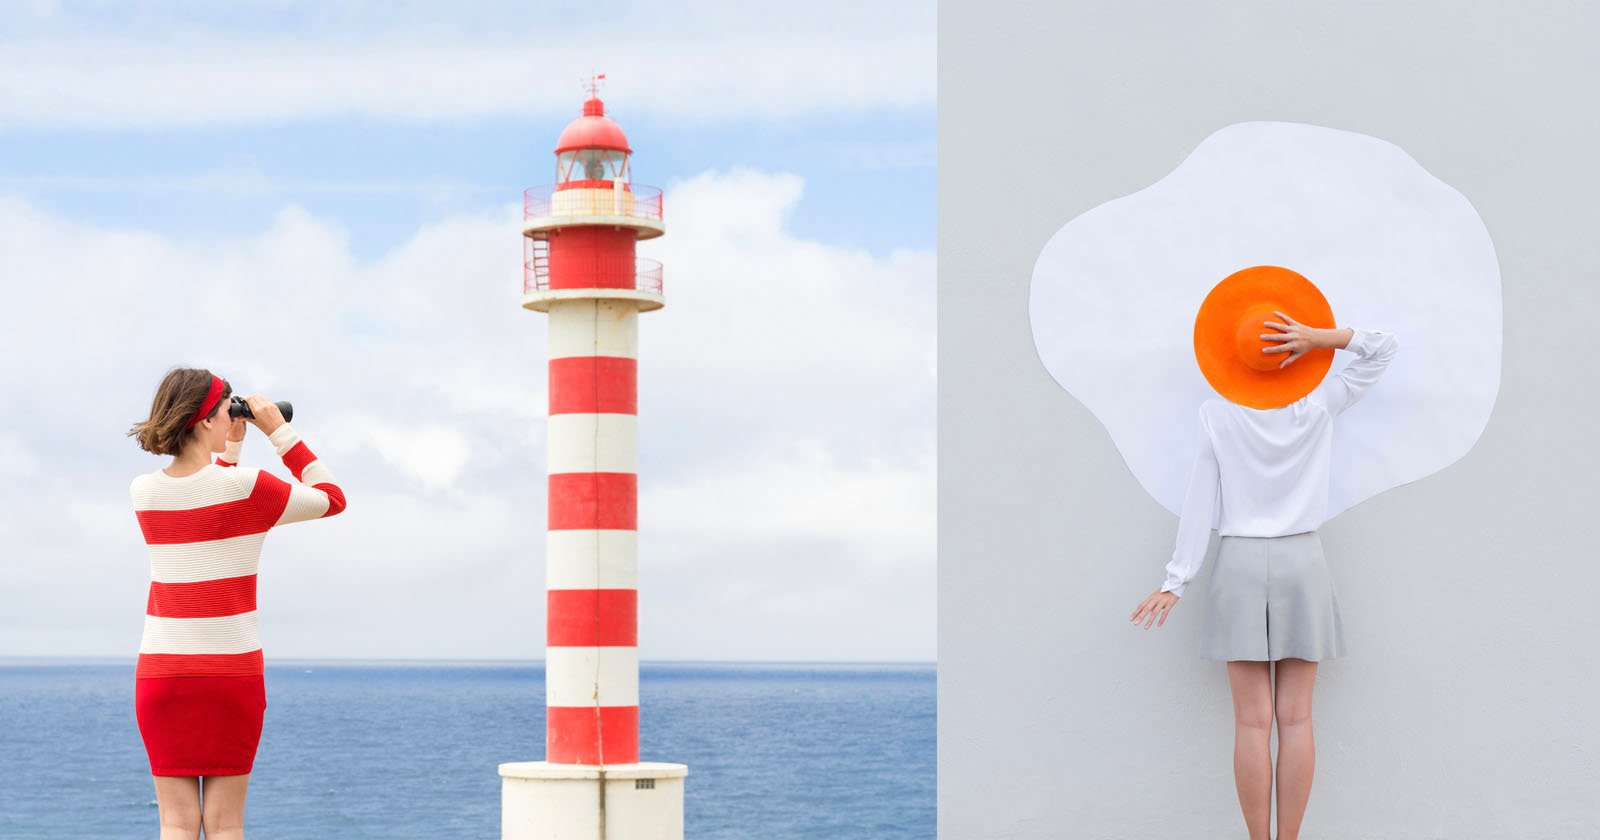 Quirky Photo Project Celebrates the Comedy and Beauty of Architecture